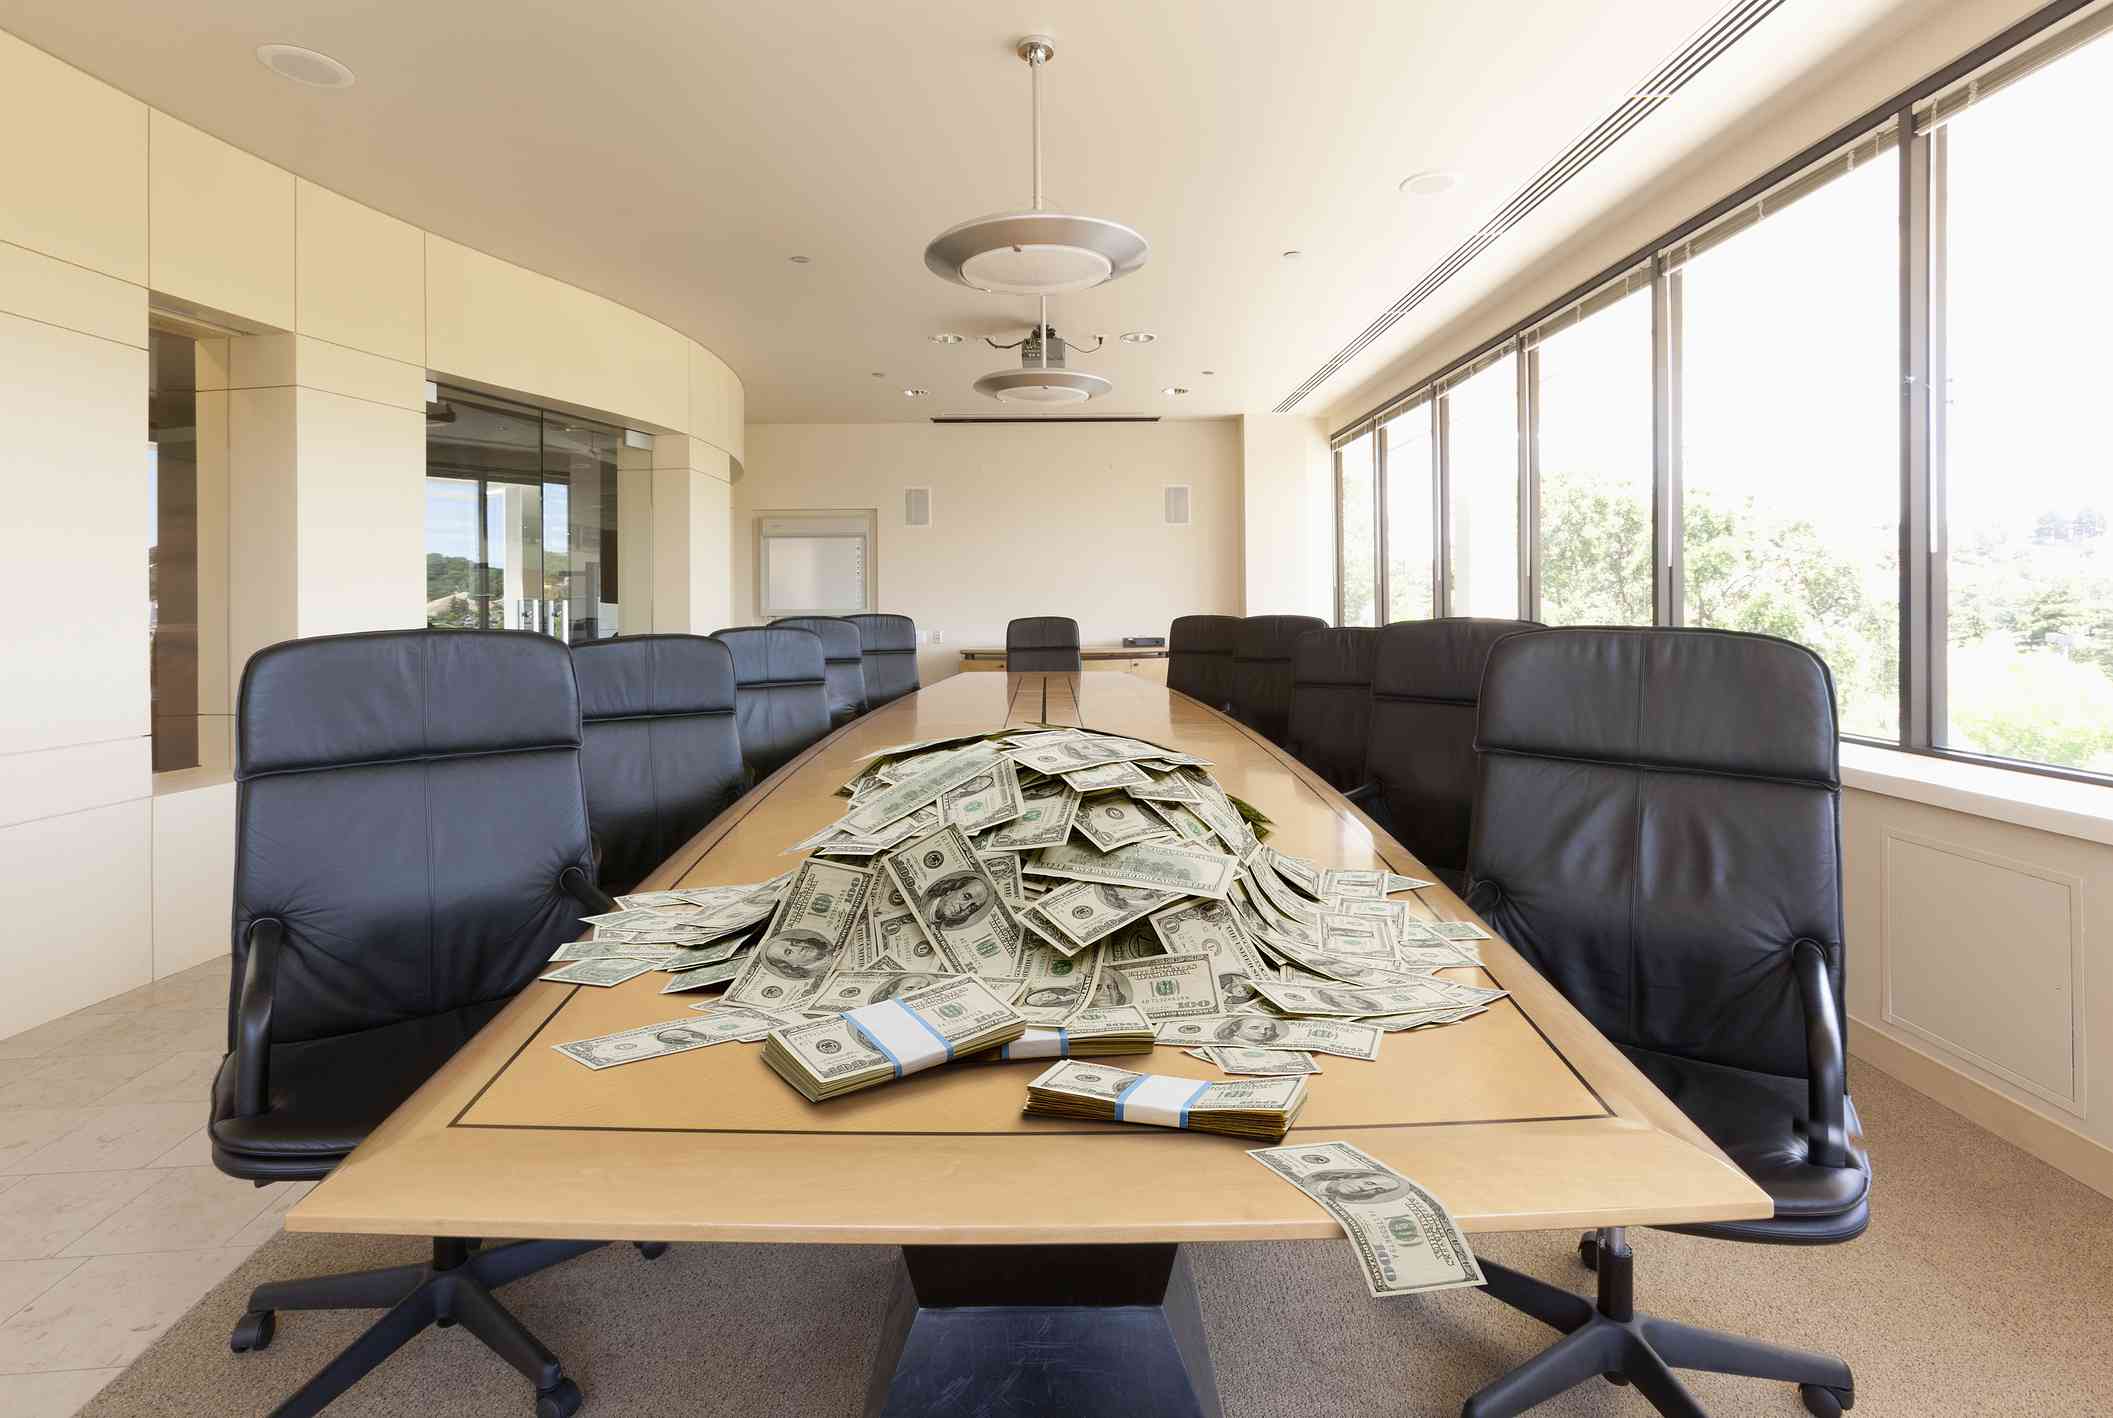 A pile of dollars on conference table.